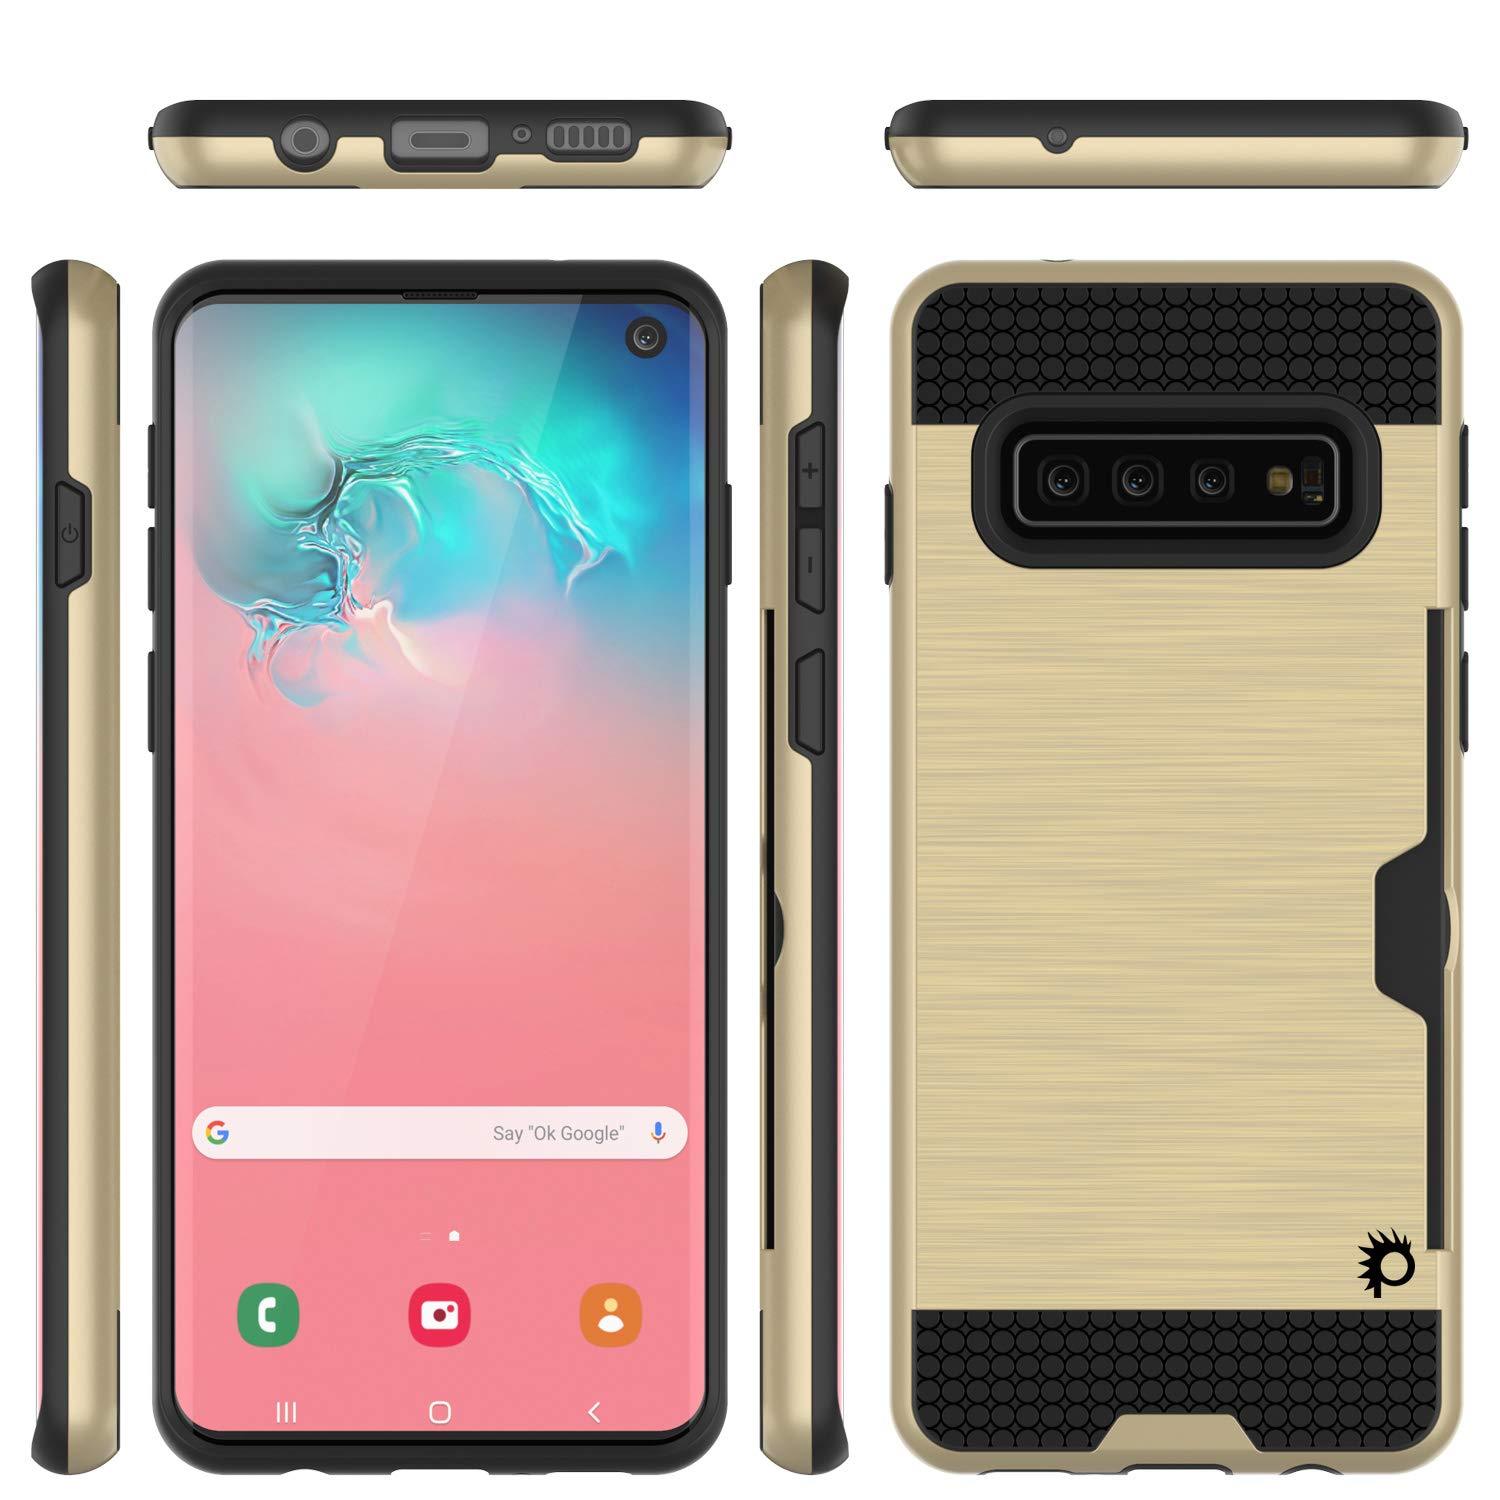 Galaxy S10e Case, PUNKcase [SLOT Series] [Slim Fit] Dual-Layer Armor Cover w/Integrated Anti-Shock System, Credit Card Slot [Gold]